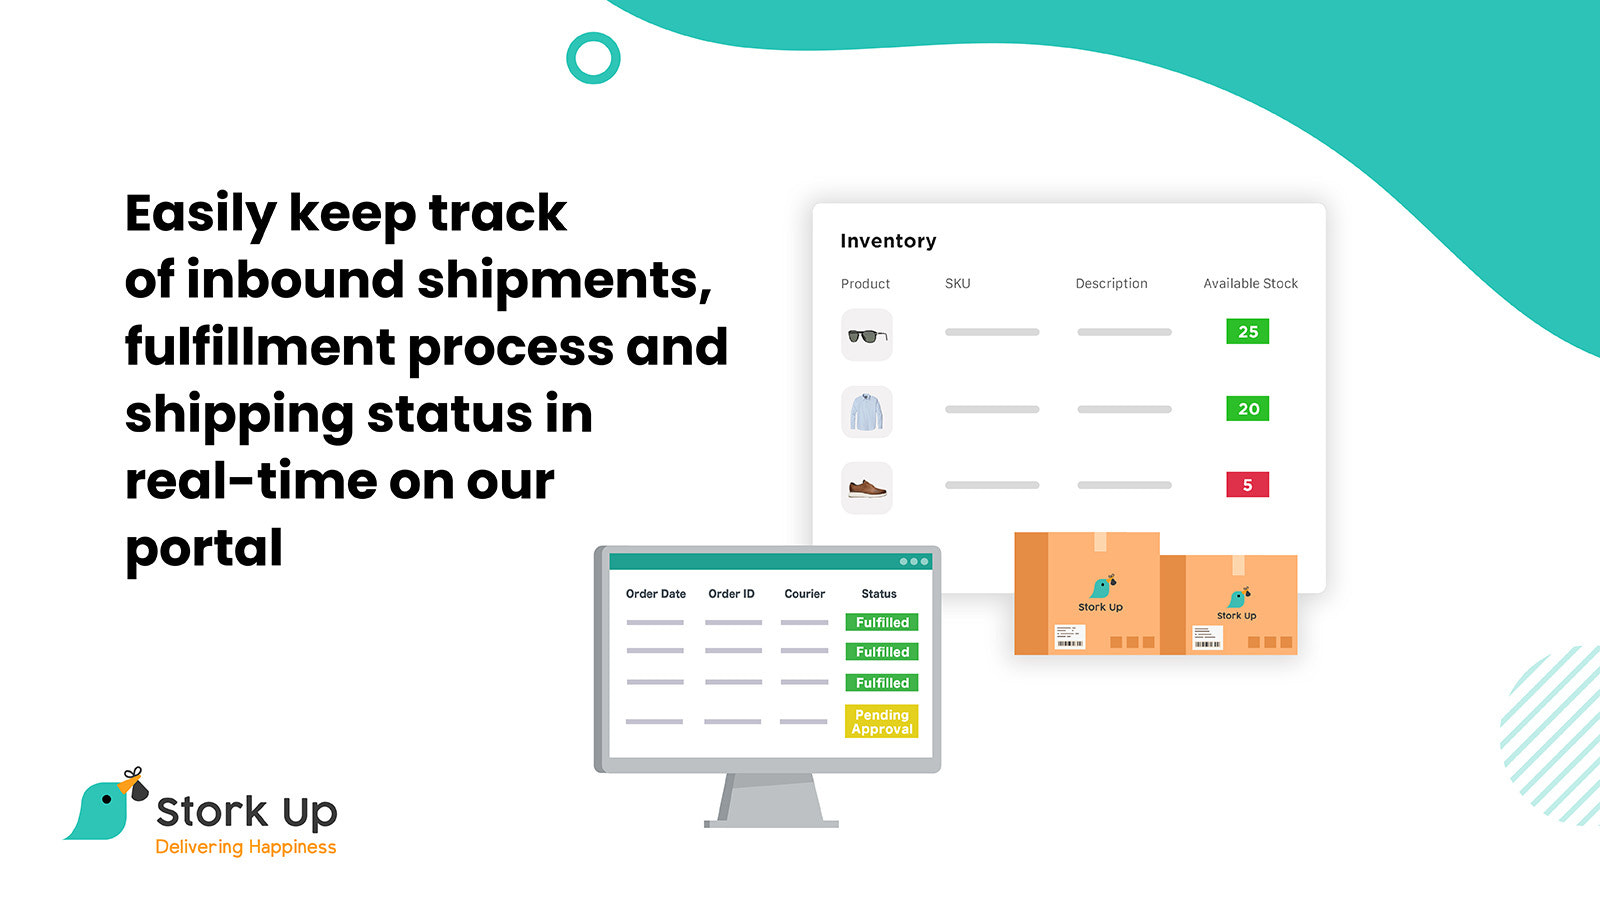 Keep track of orders, inventories, shipments in real-time